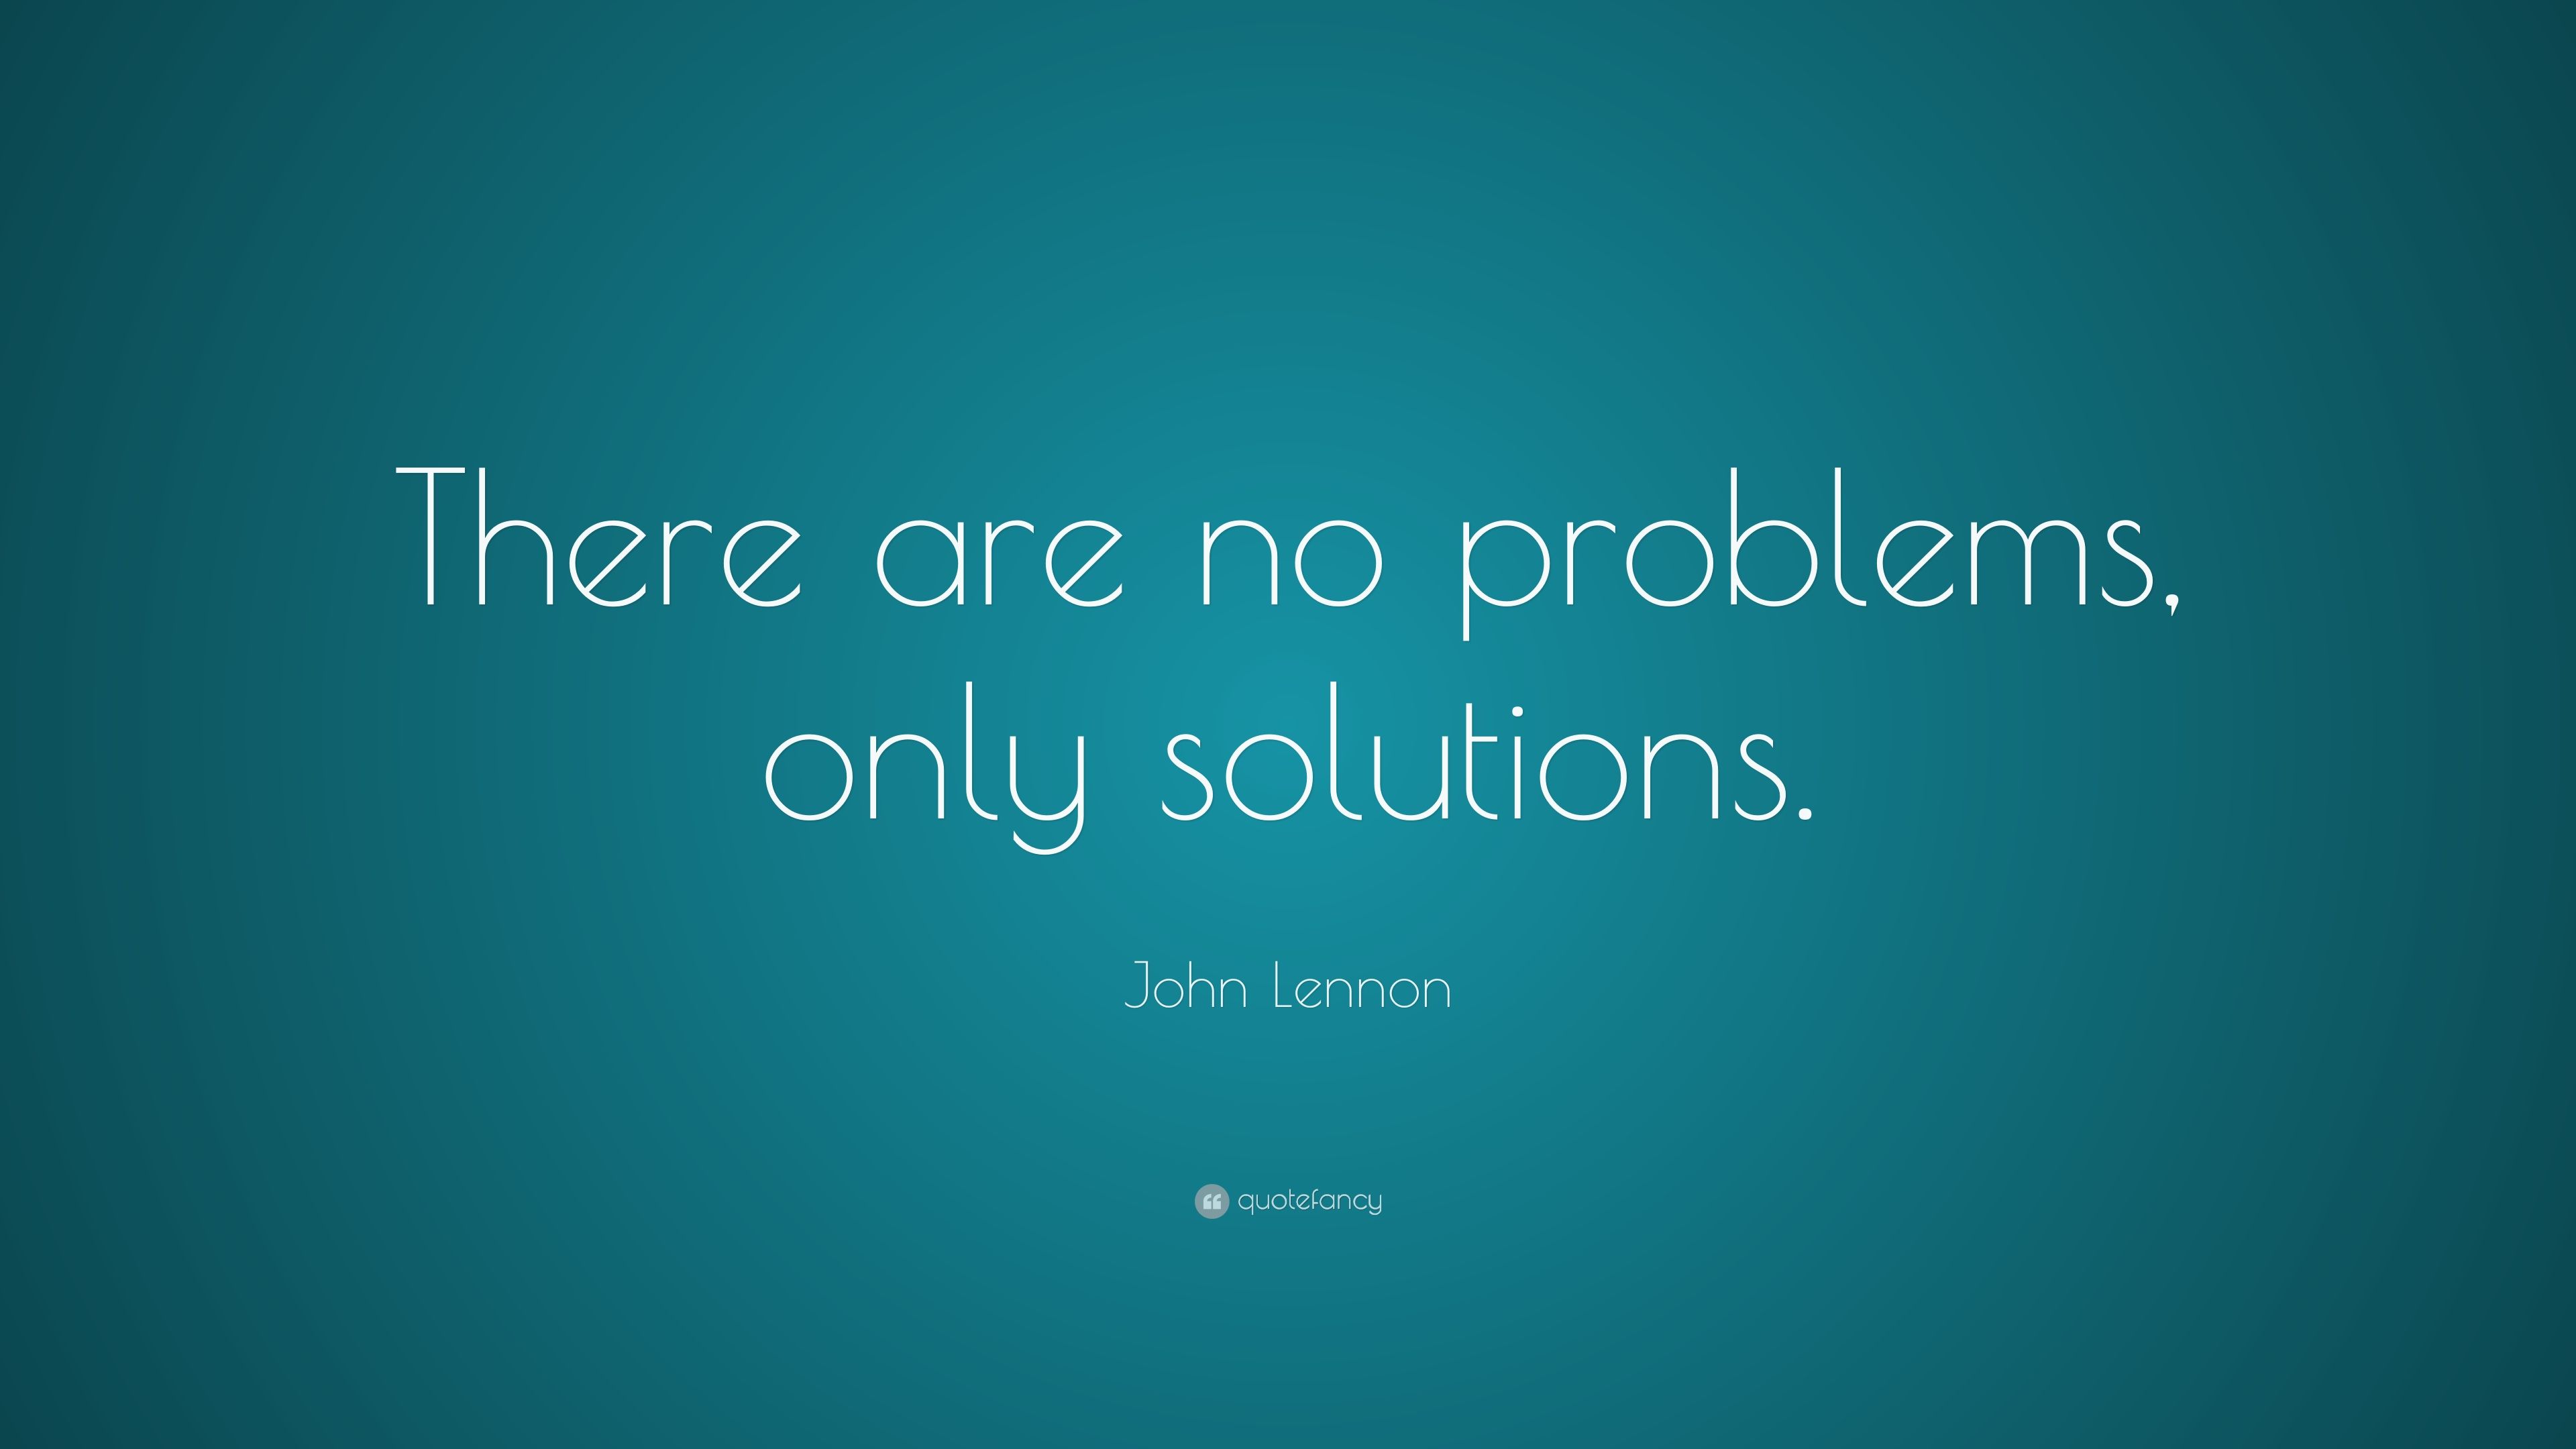 John Lennon Quote: “There are no problems, only solutions.” (20 wallpaper)